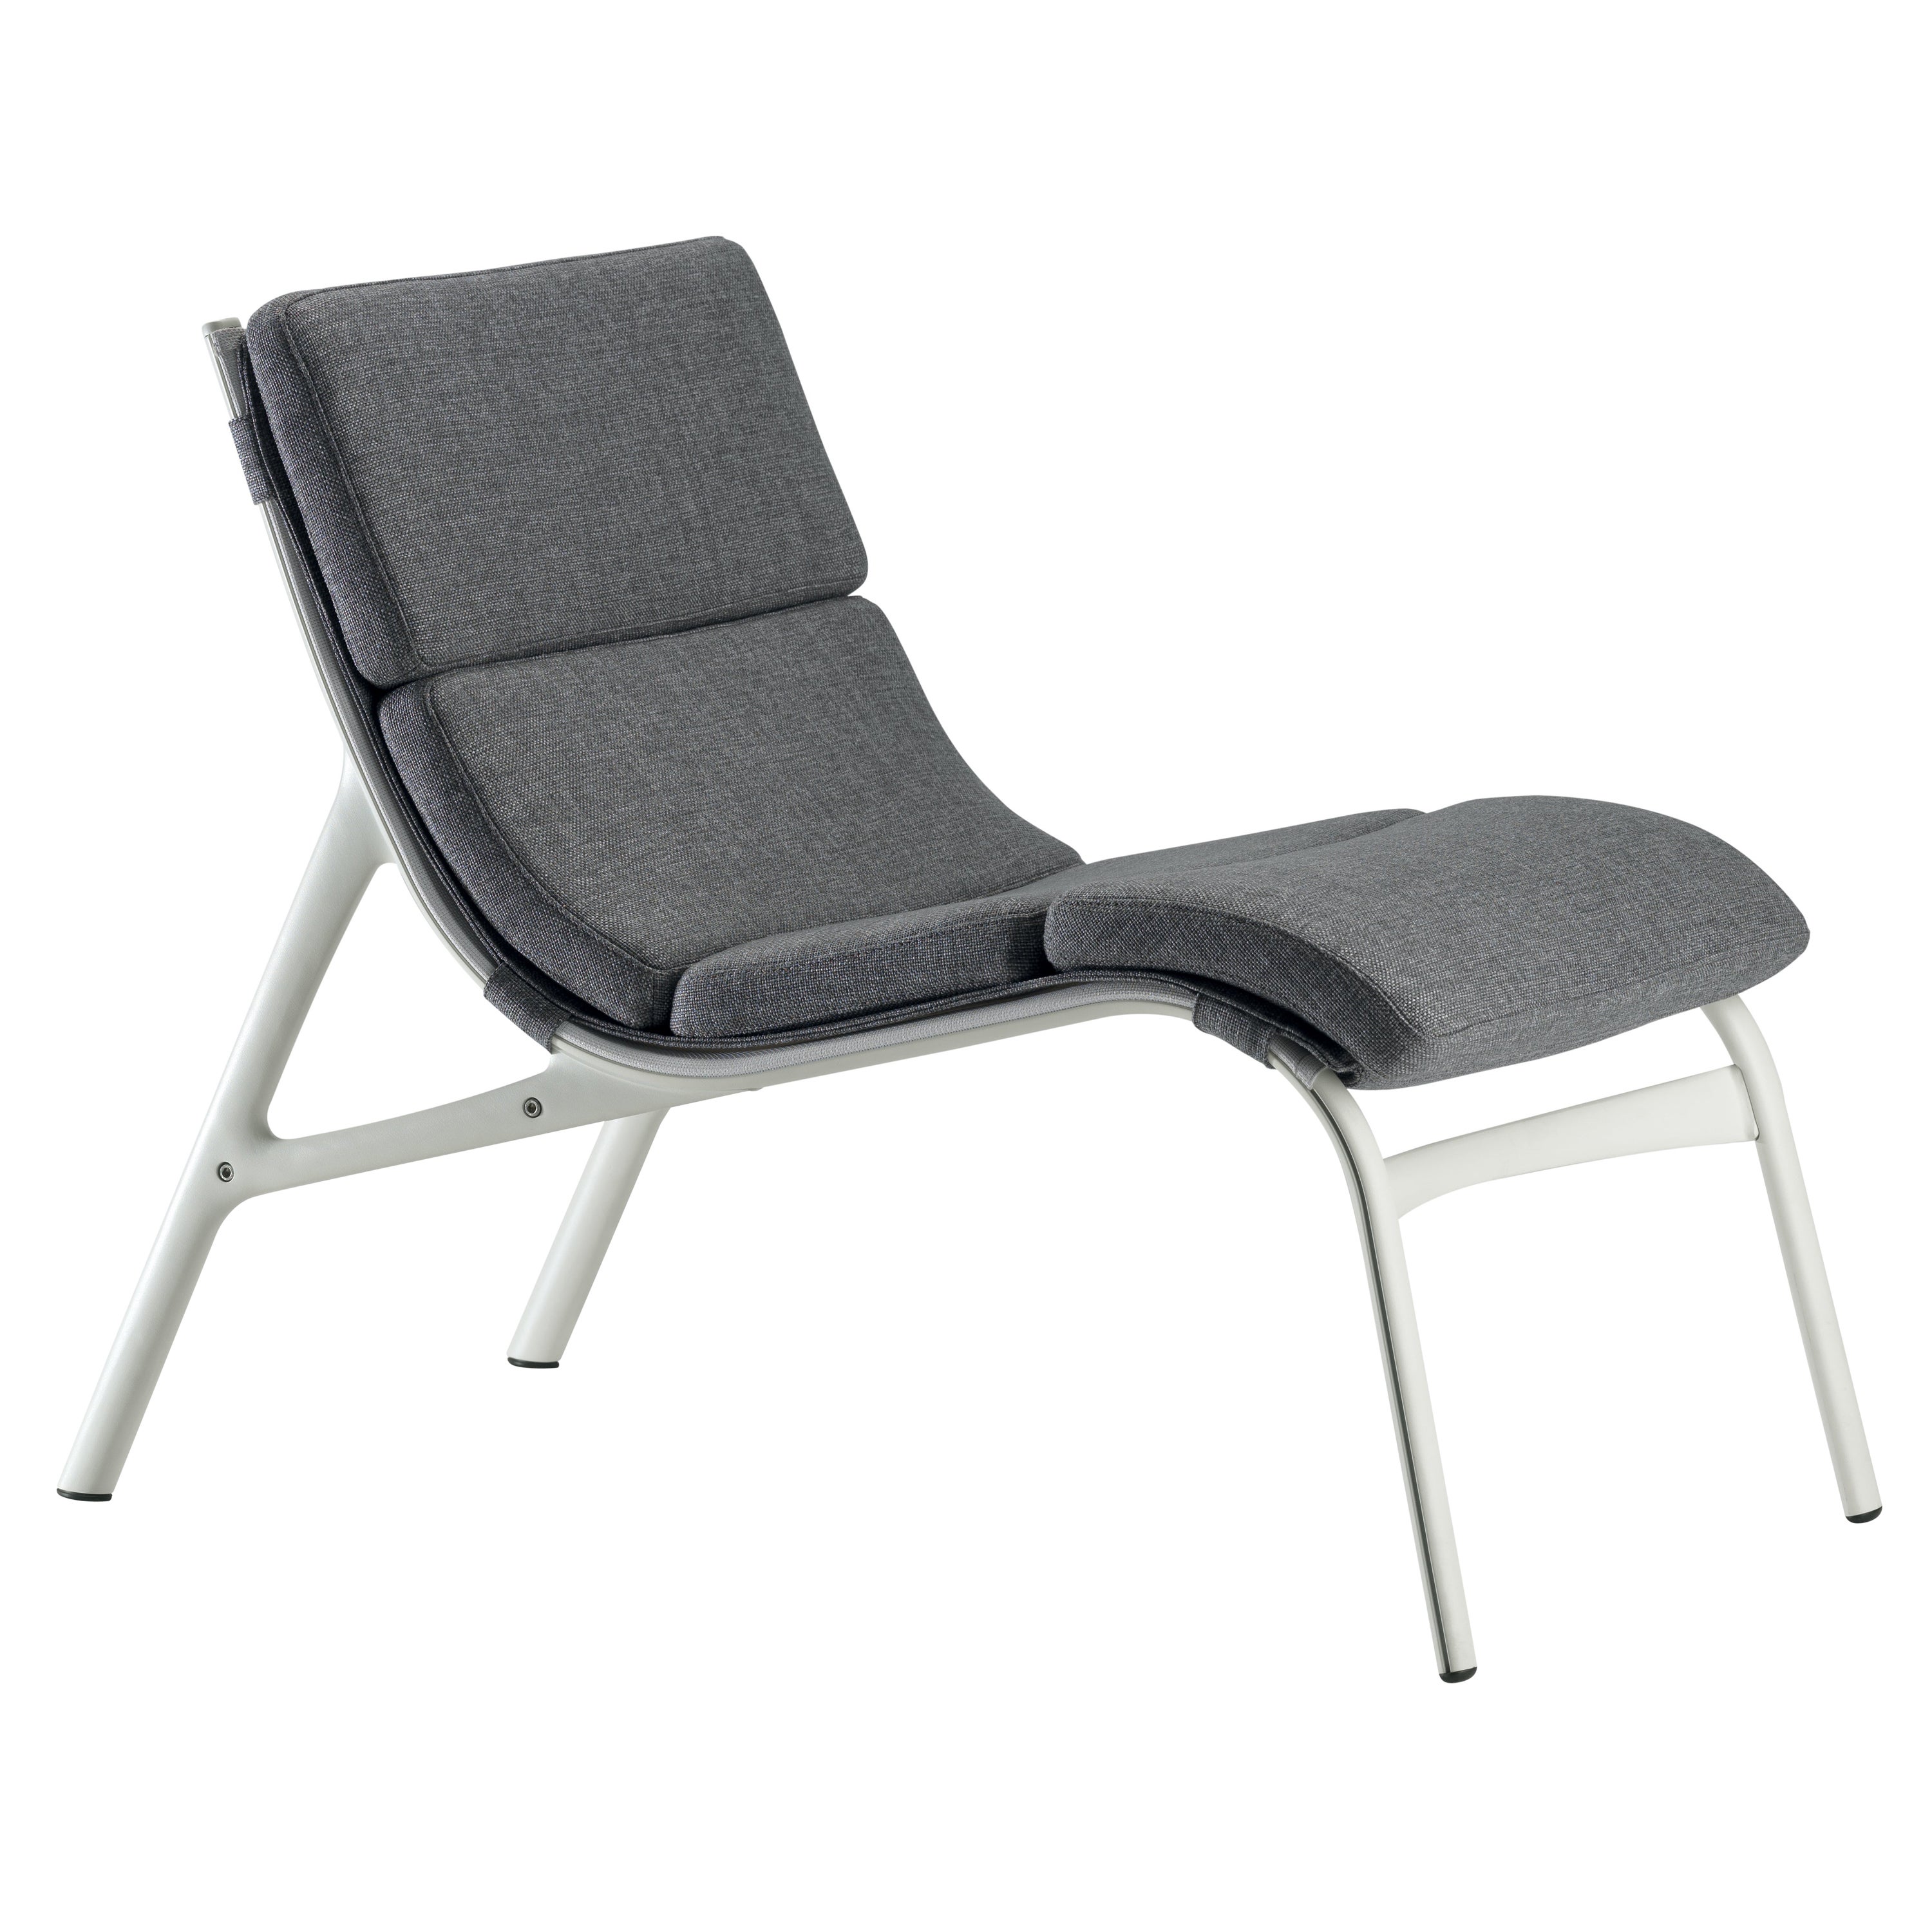 Alias 462 Armframe Soft Chair in White Mesh & Grey Seat with Lacquered Frame